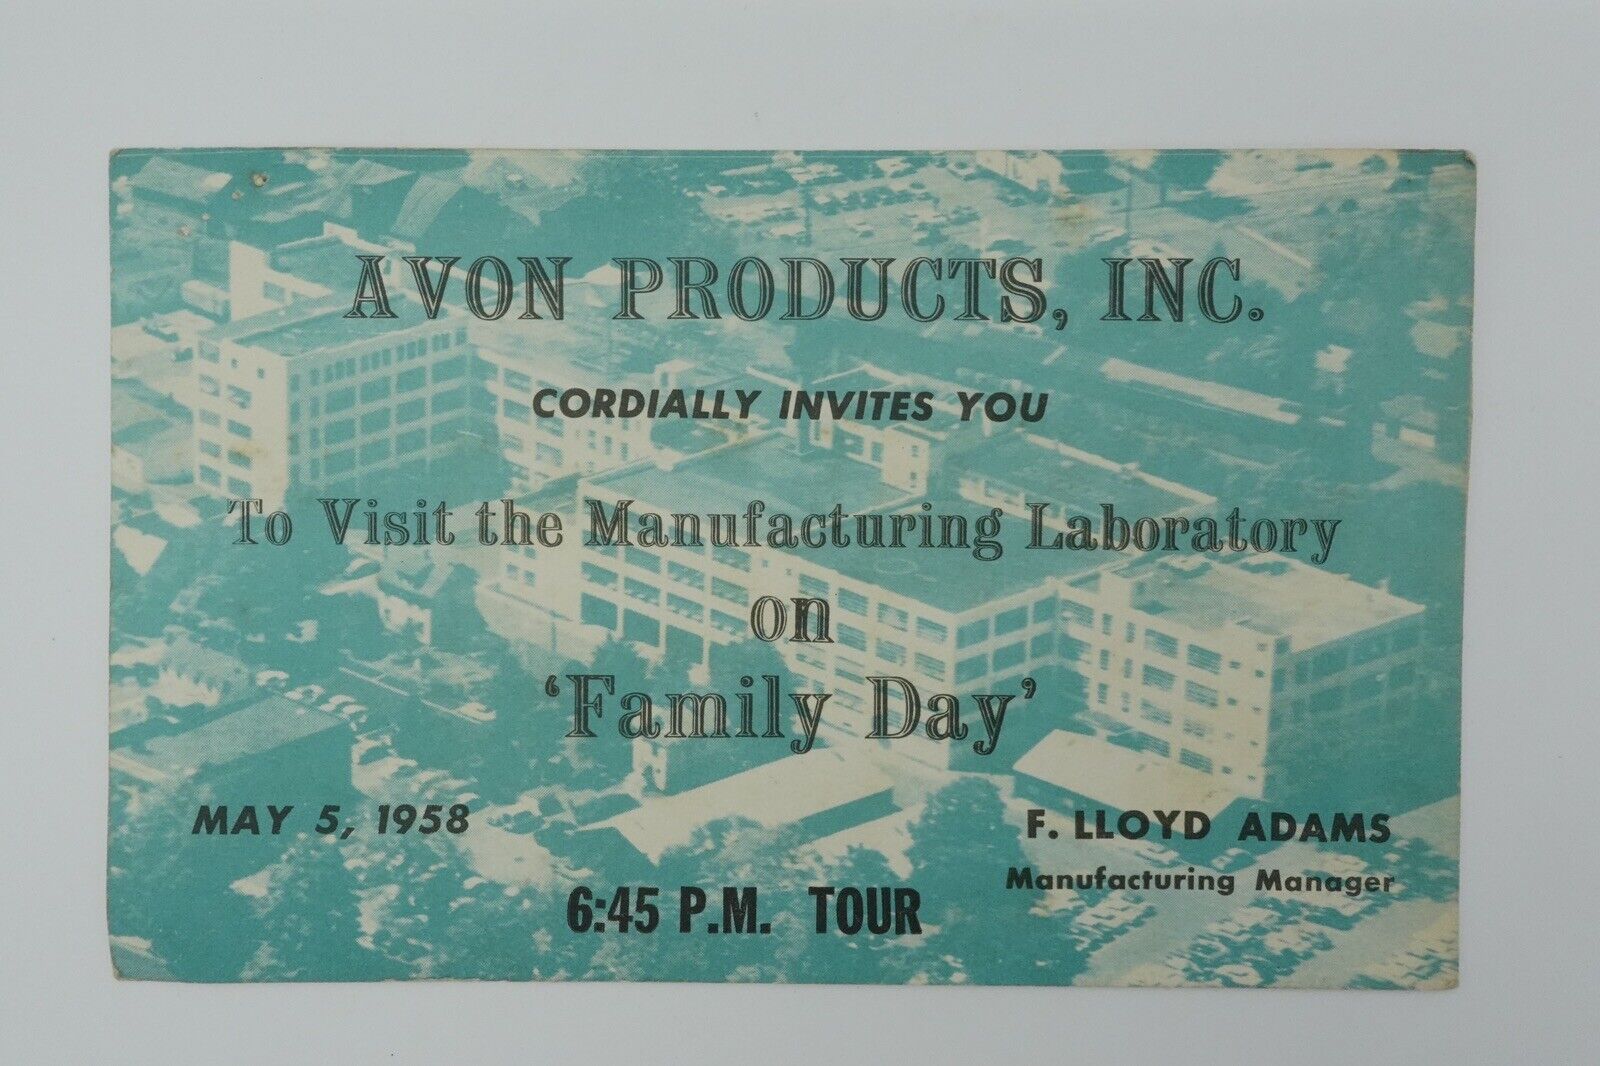 Avon Products Family Day Manufacturing Lab Suffern NY May 5, 1958 Invitation